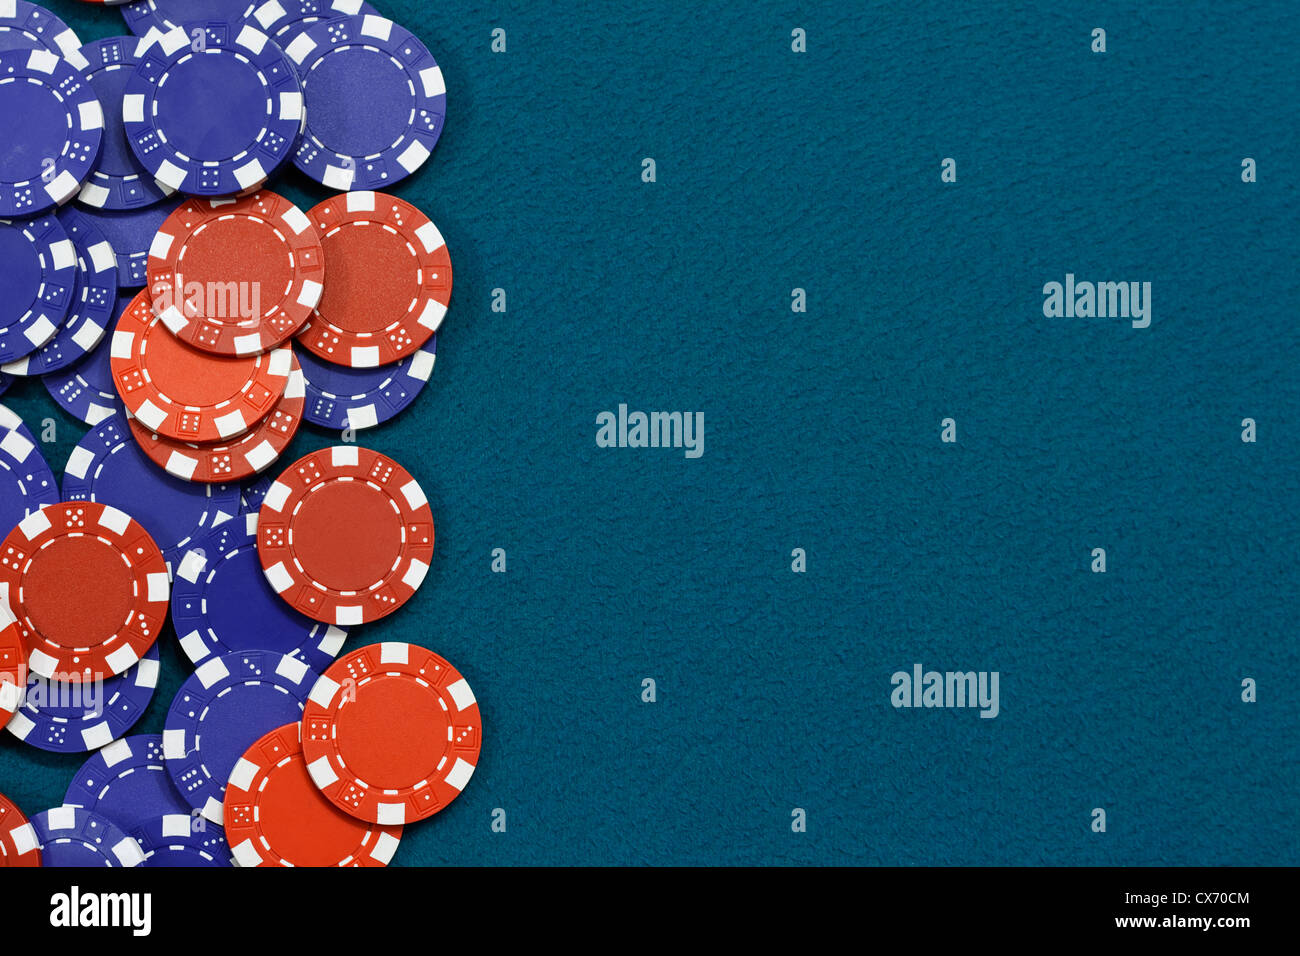 Gambling chips frame on Blue card table background Stock Photo